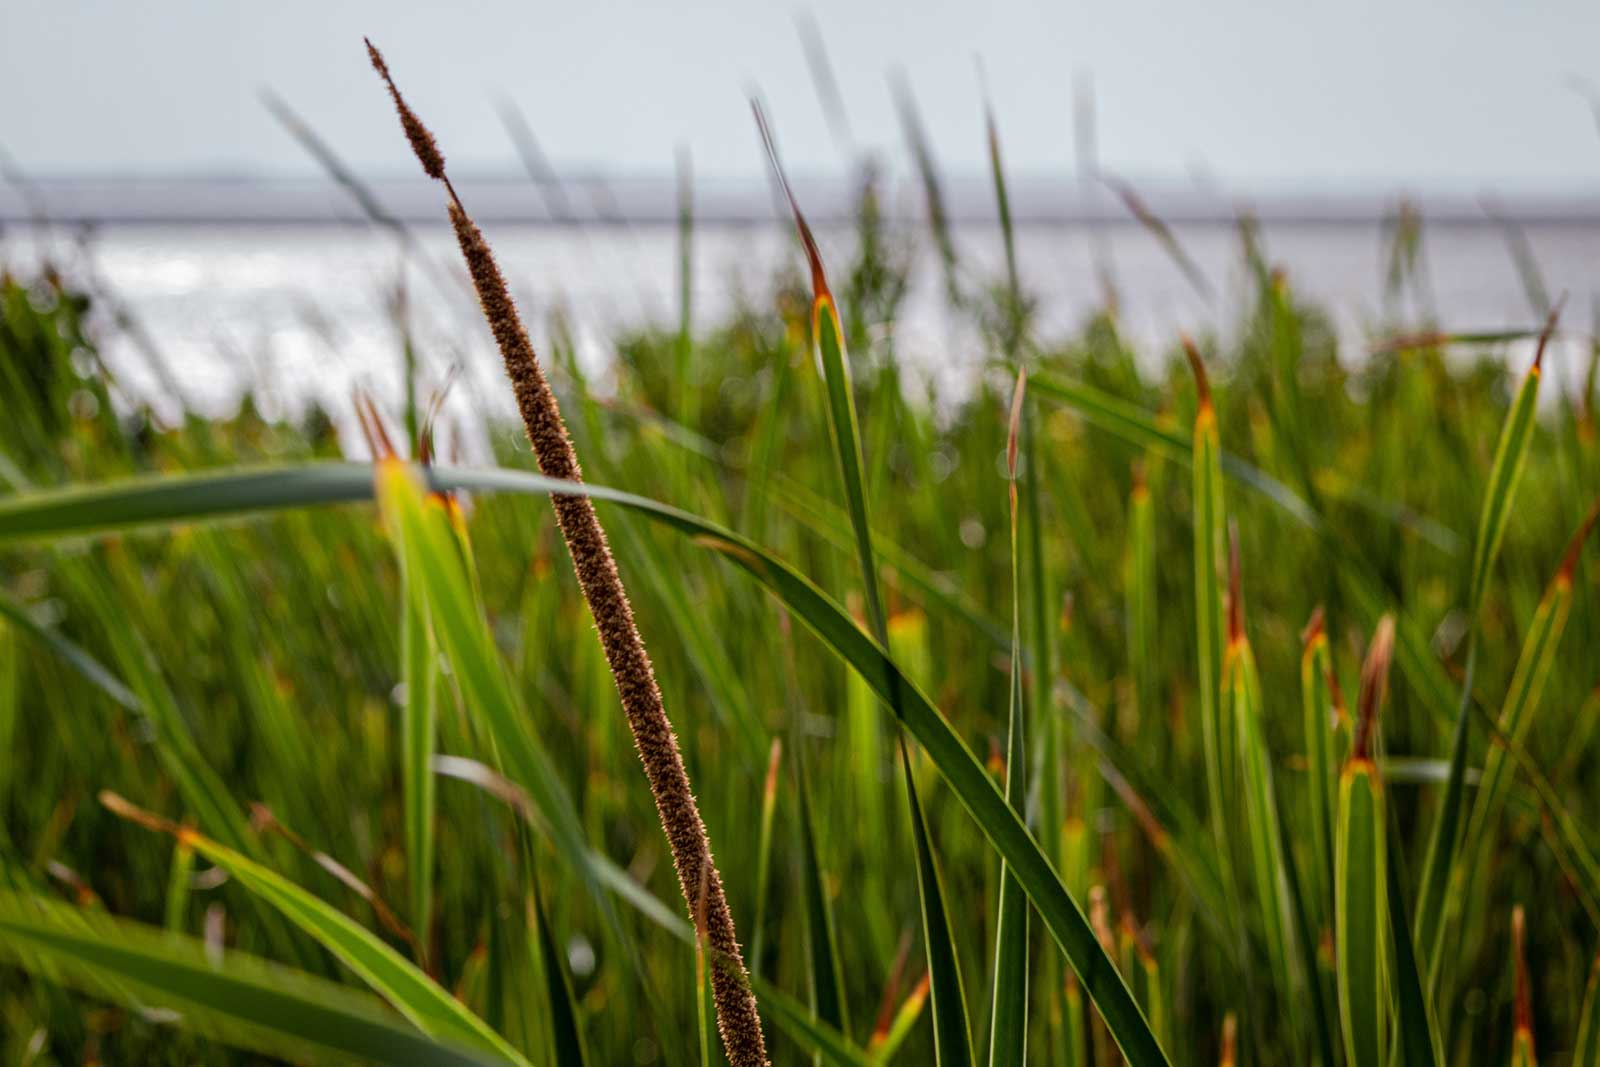 A close up photograph of reeds and plants along a water front.